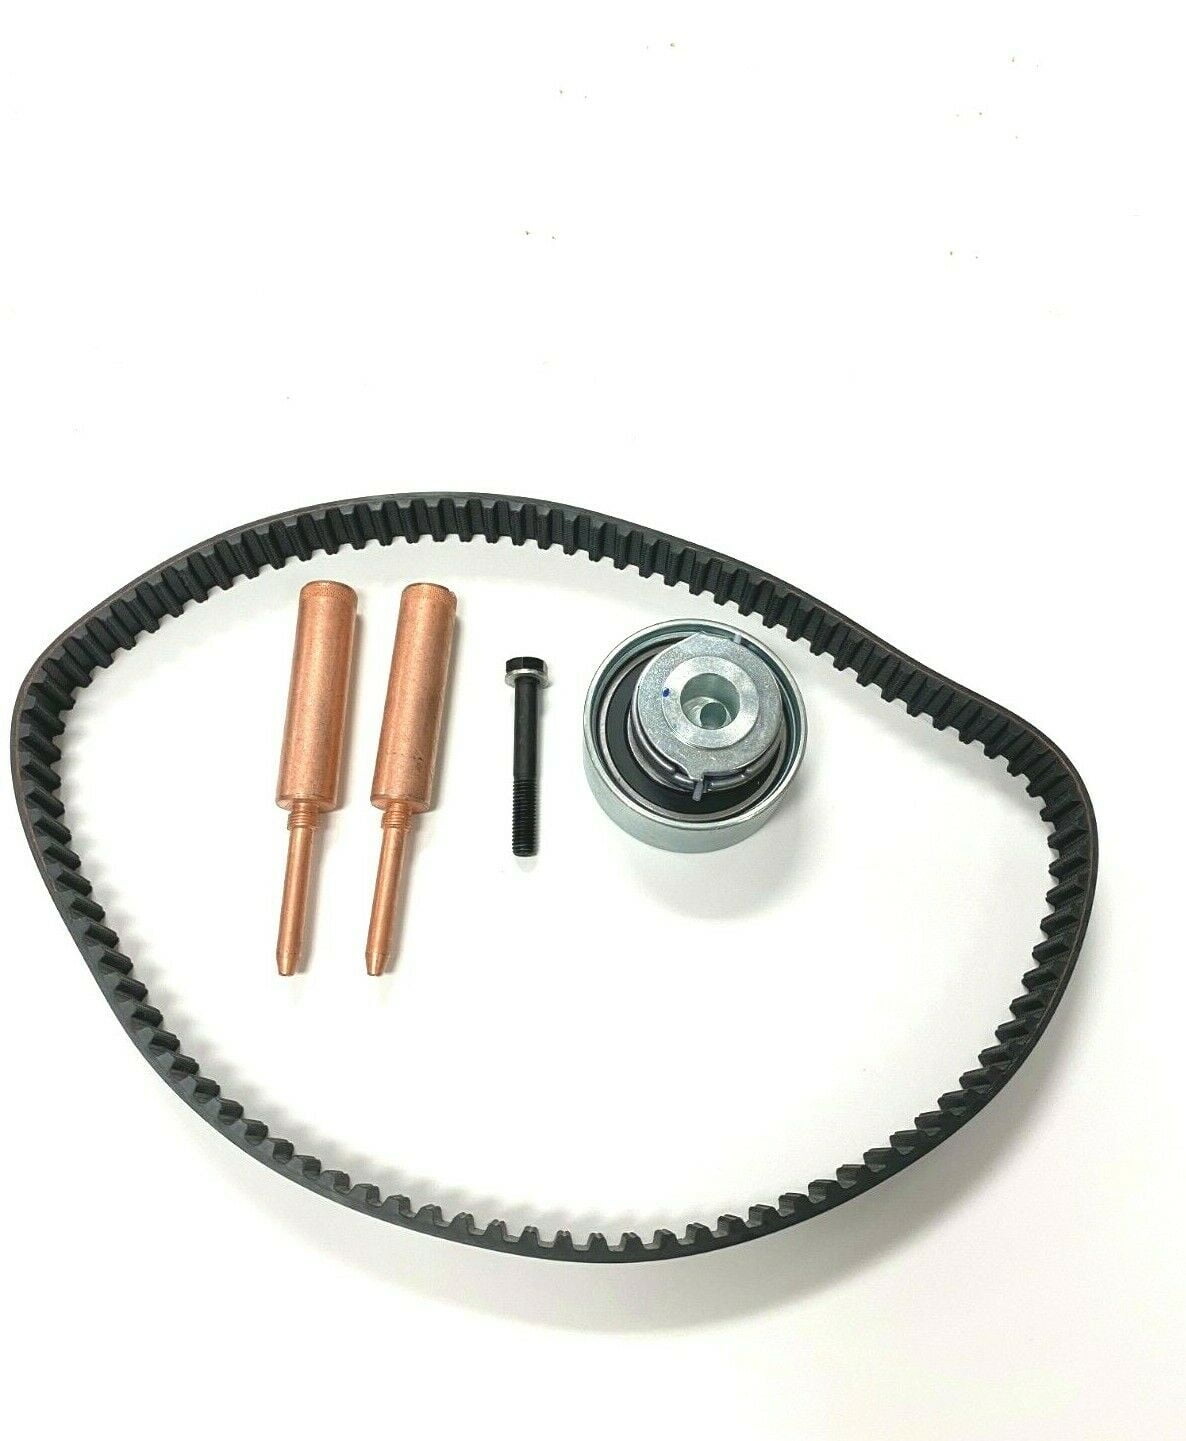 Solarhome 02931480 Timing Belt Kit with 8 Pushrods & 2 Pins for Deutz BF4M2011 2011 4 Cylinder 